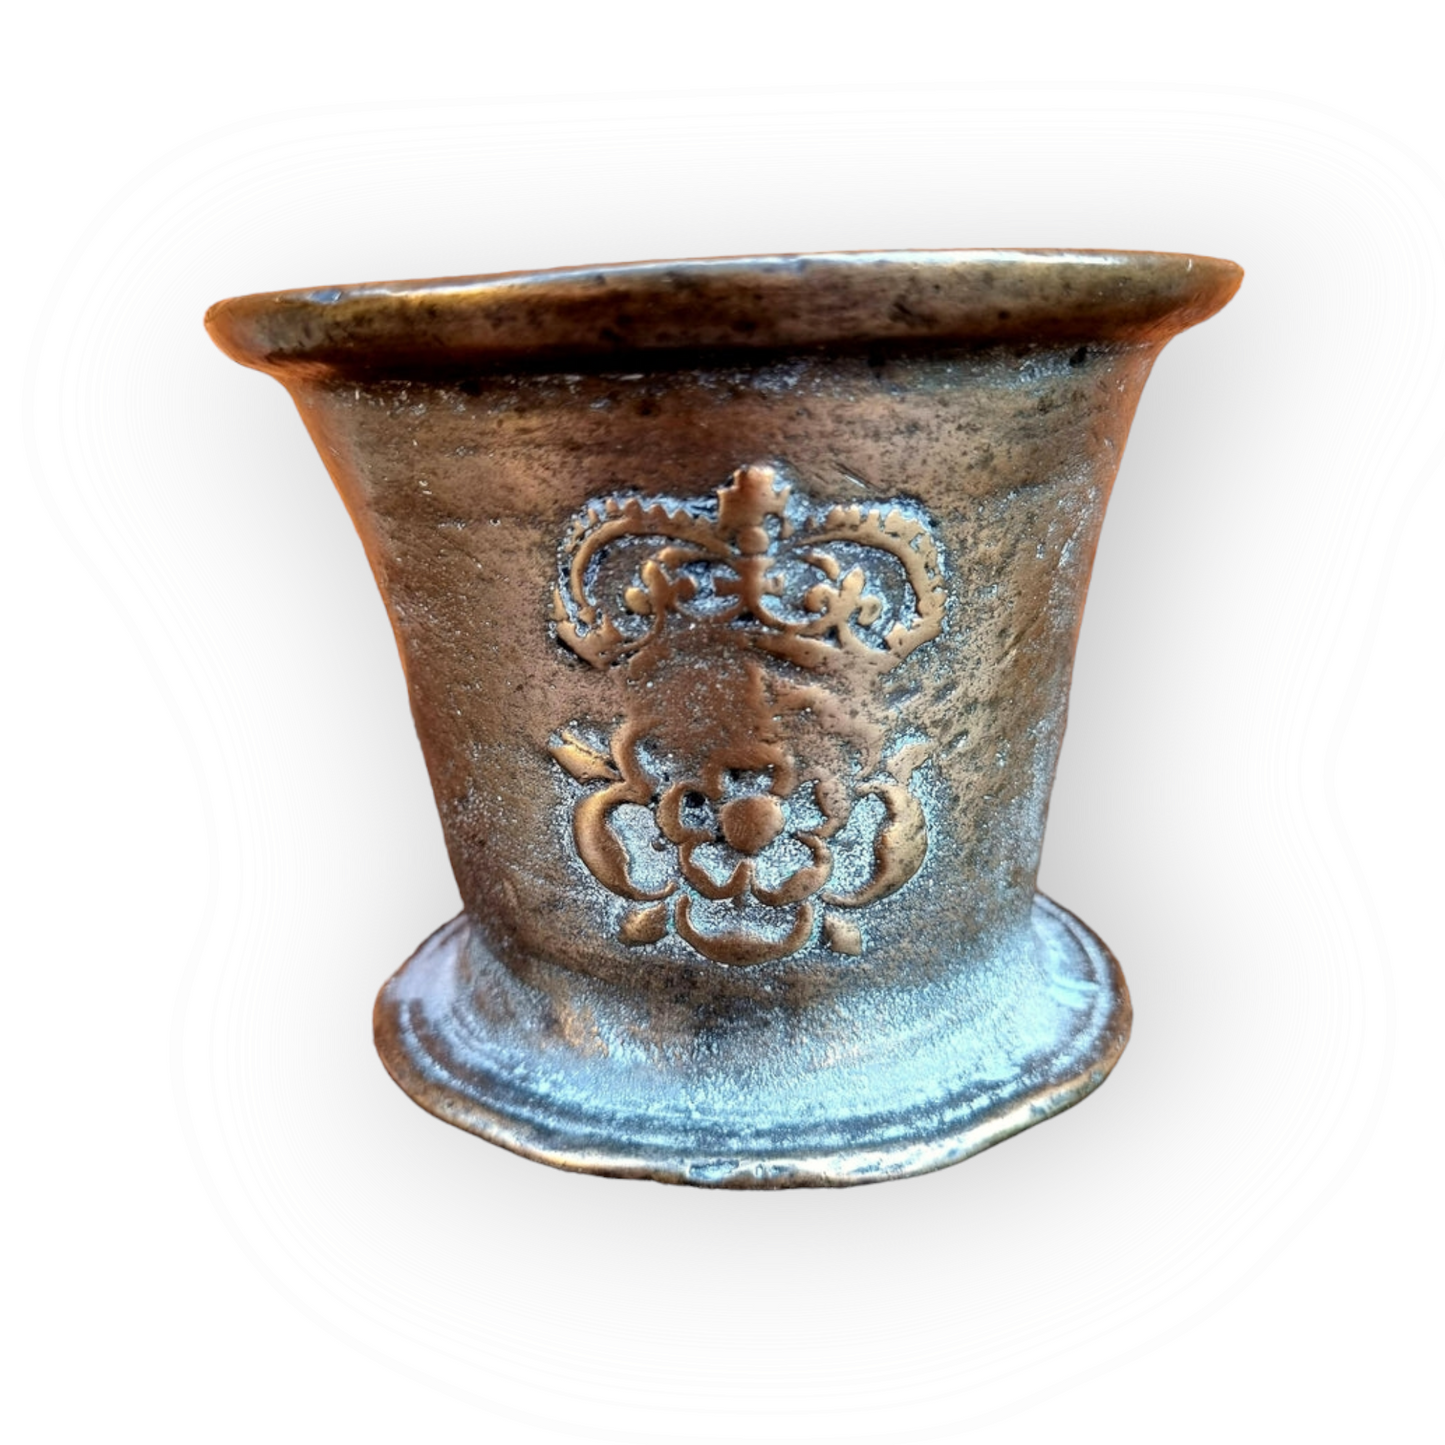 17th Century English Antique Bronze Mortar, Originating From Norfolk, East Anglia, With a Crowned Tudor Rose